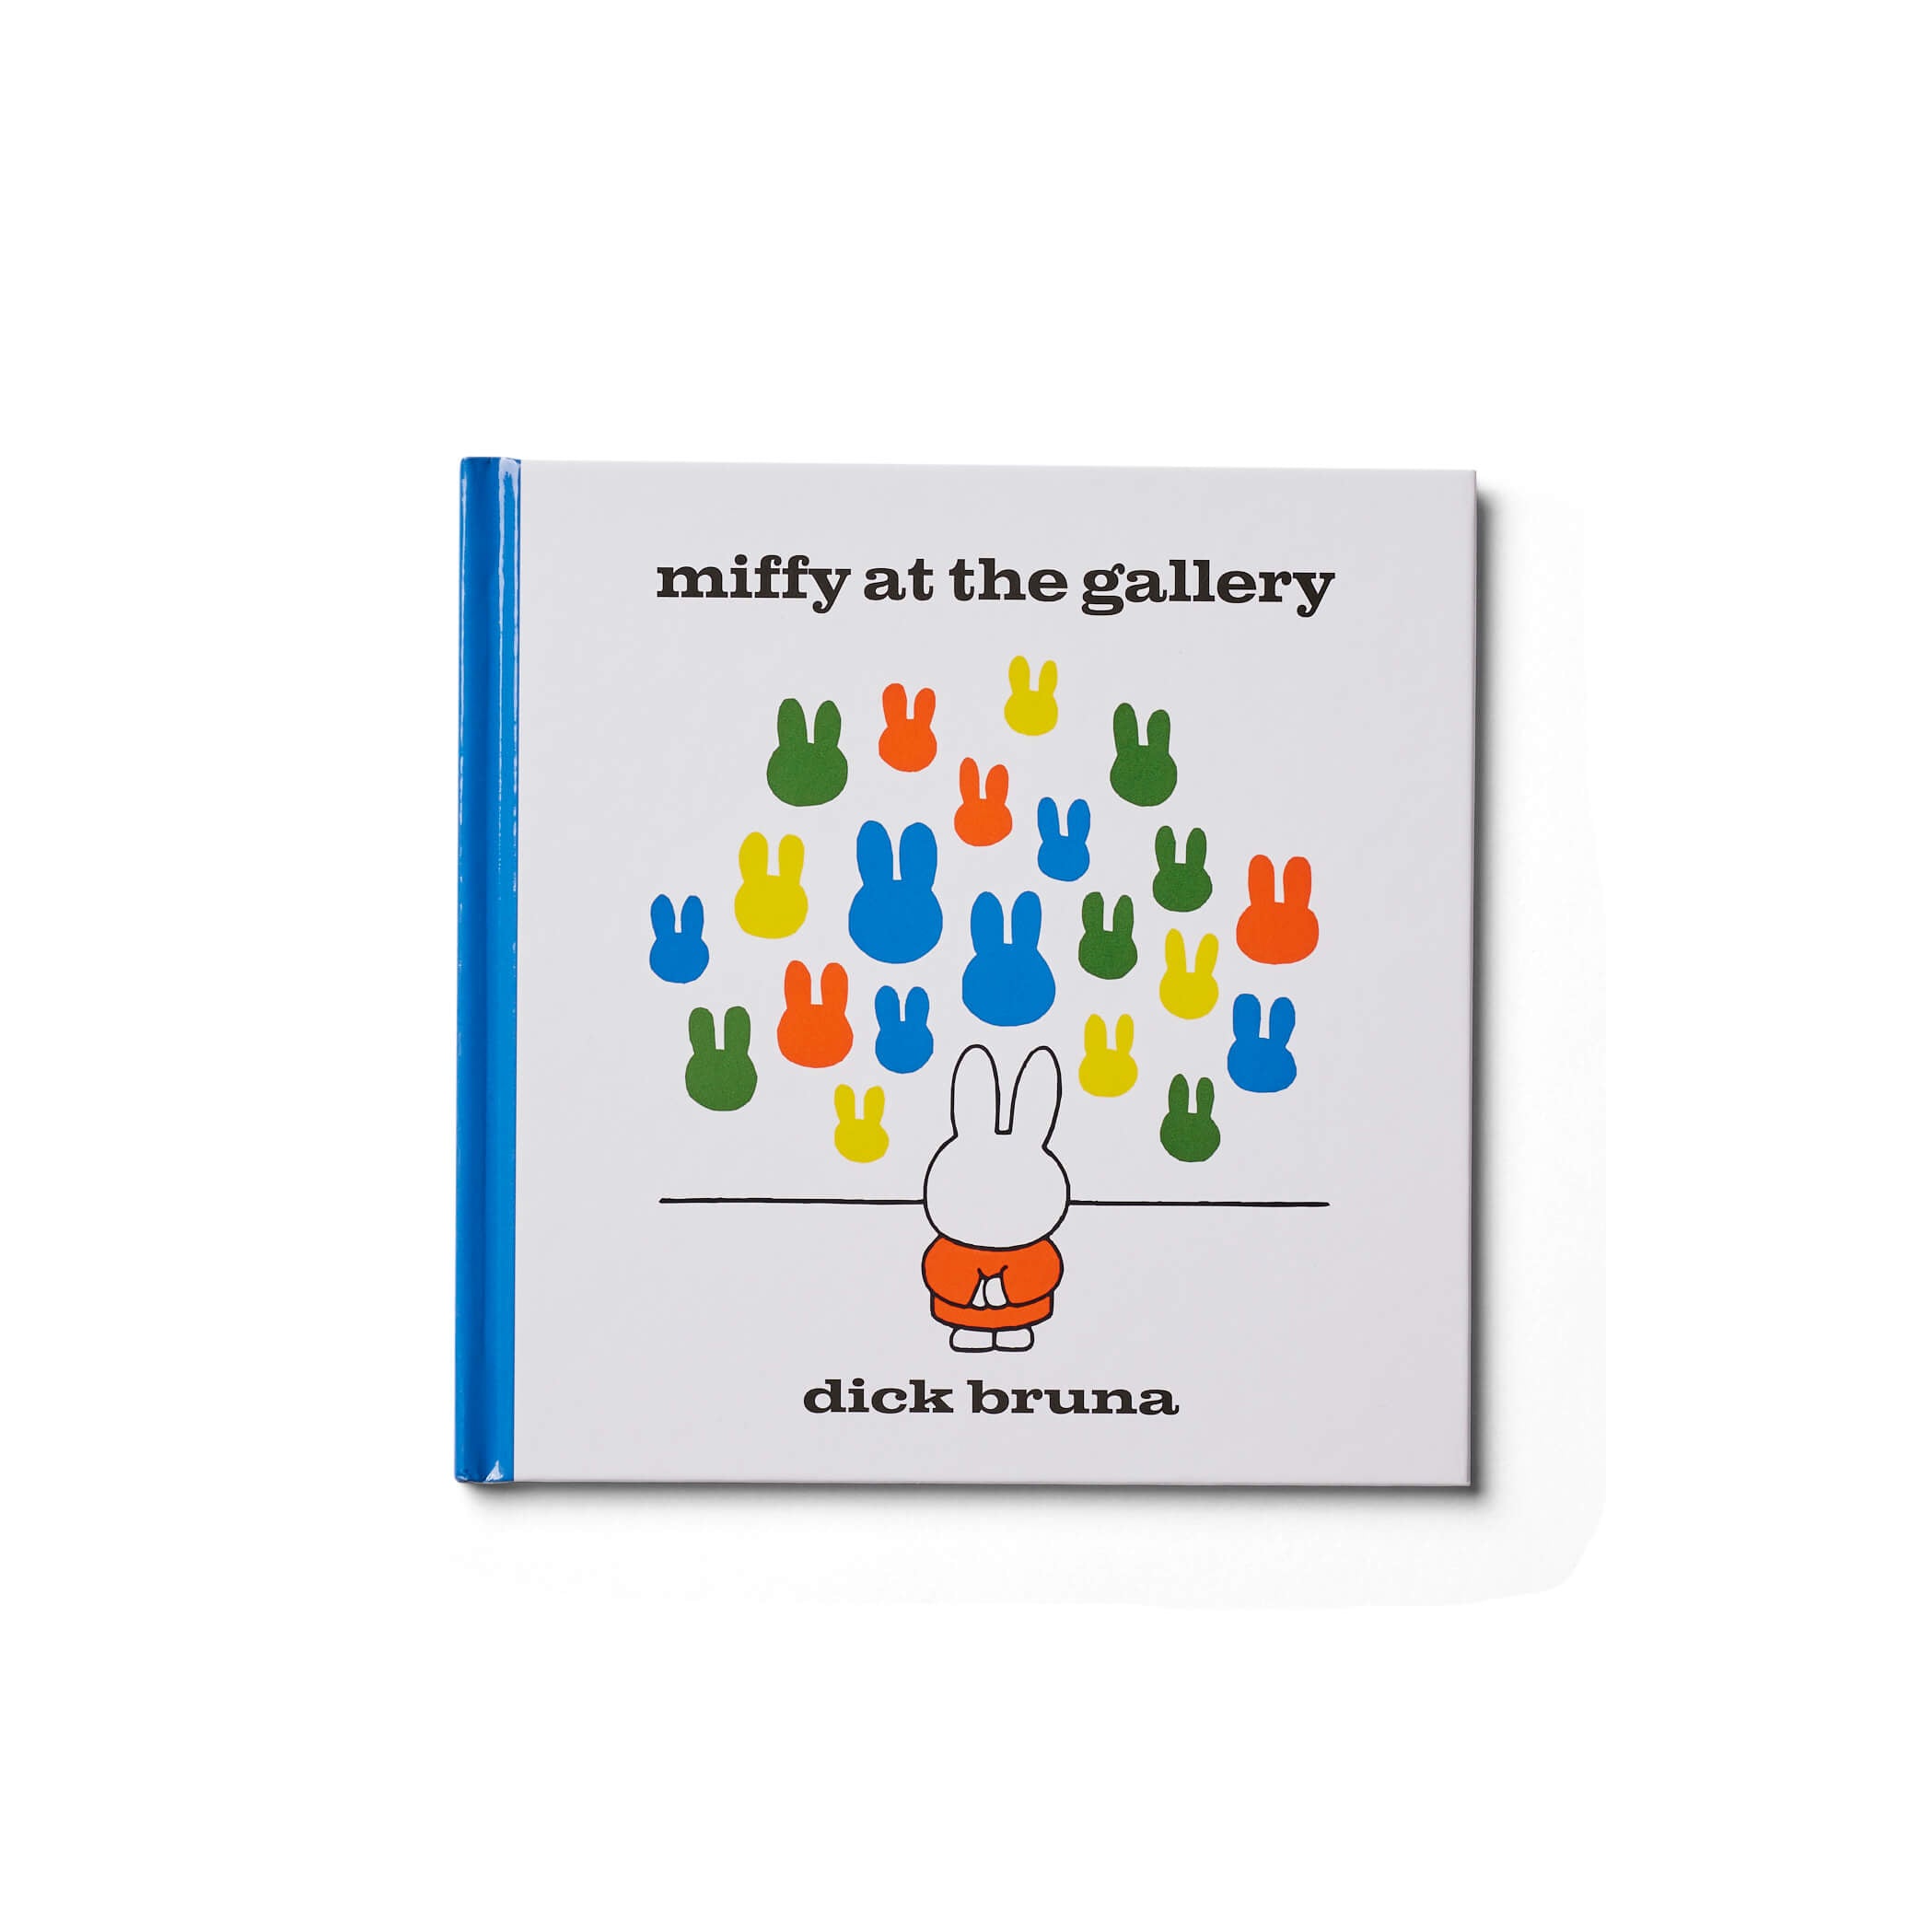 hardback book miffy at the gallery 